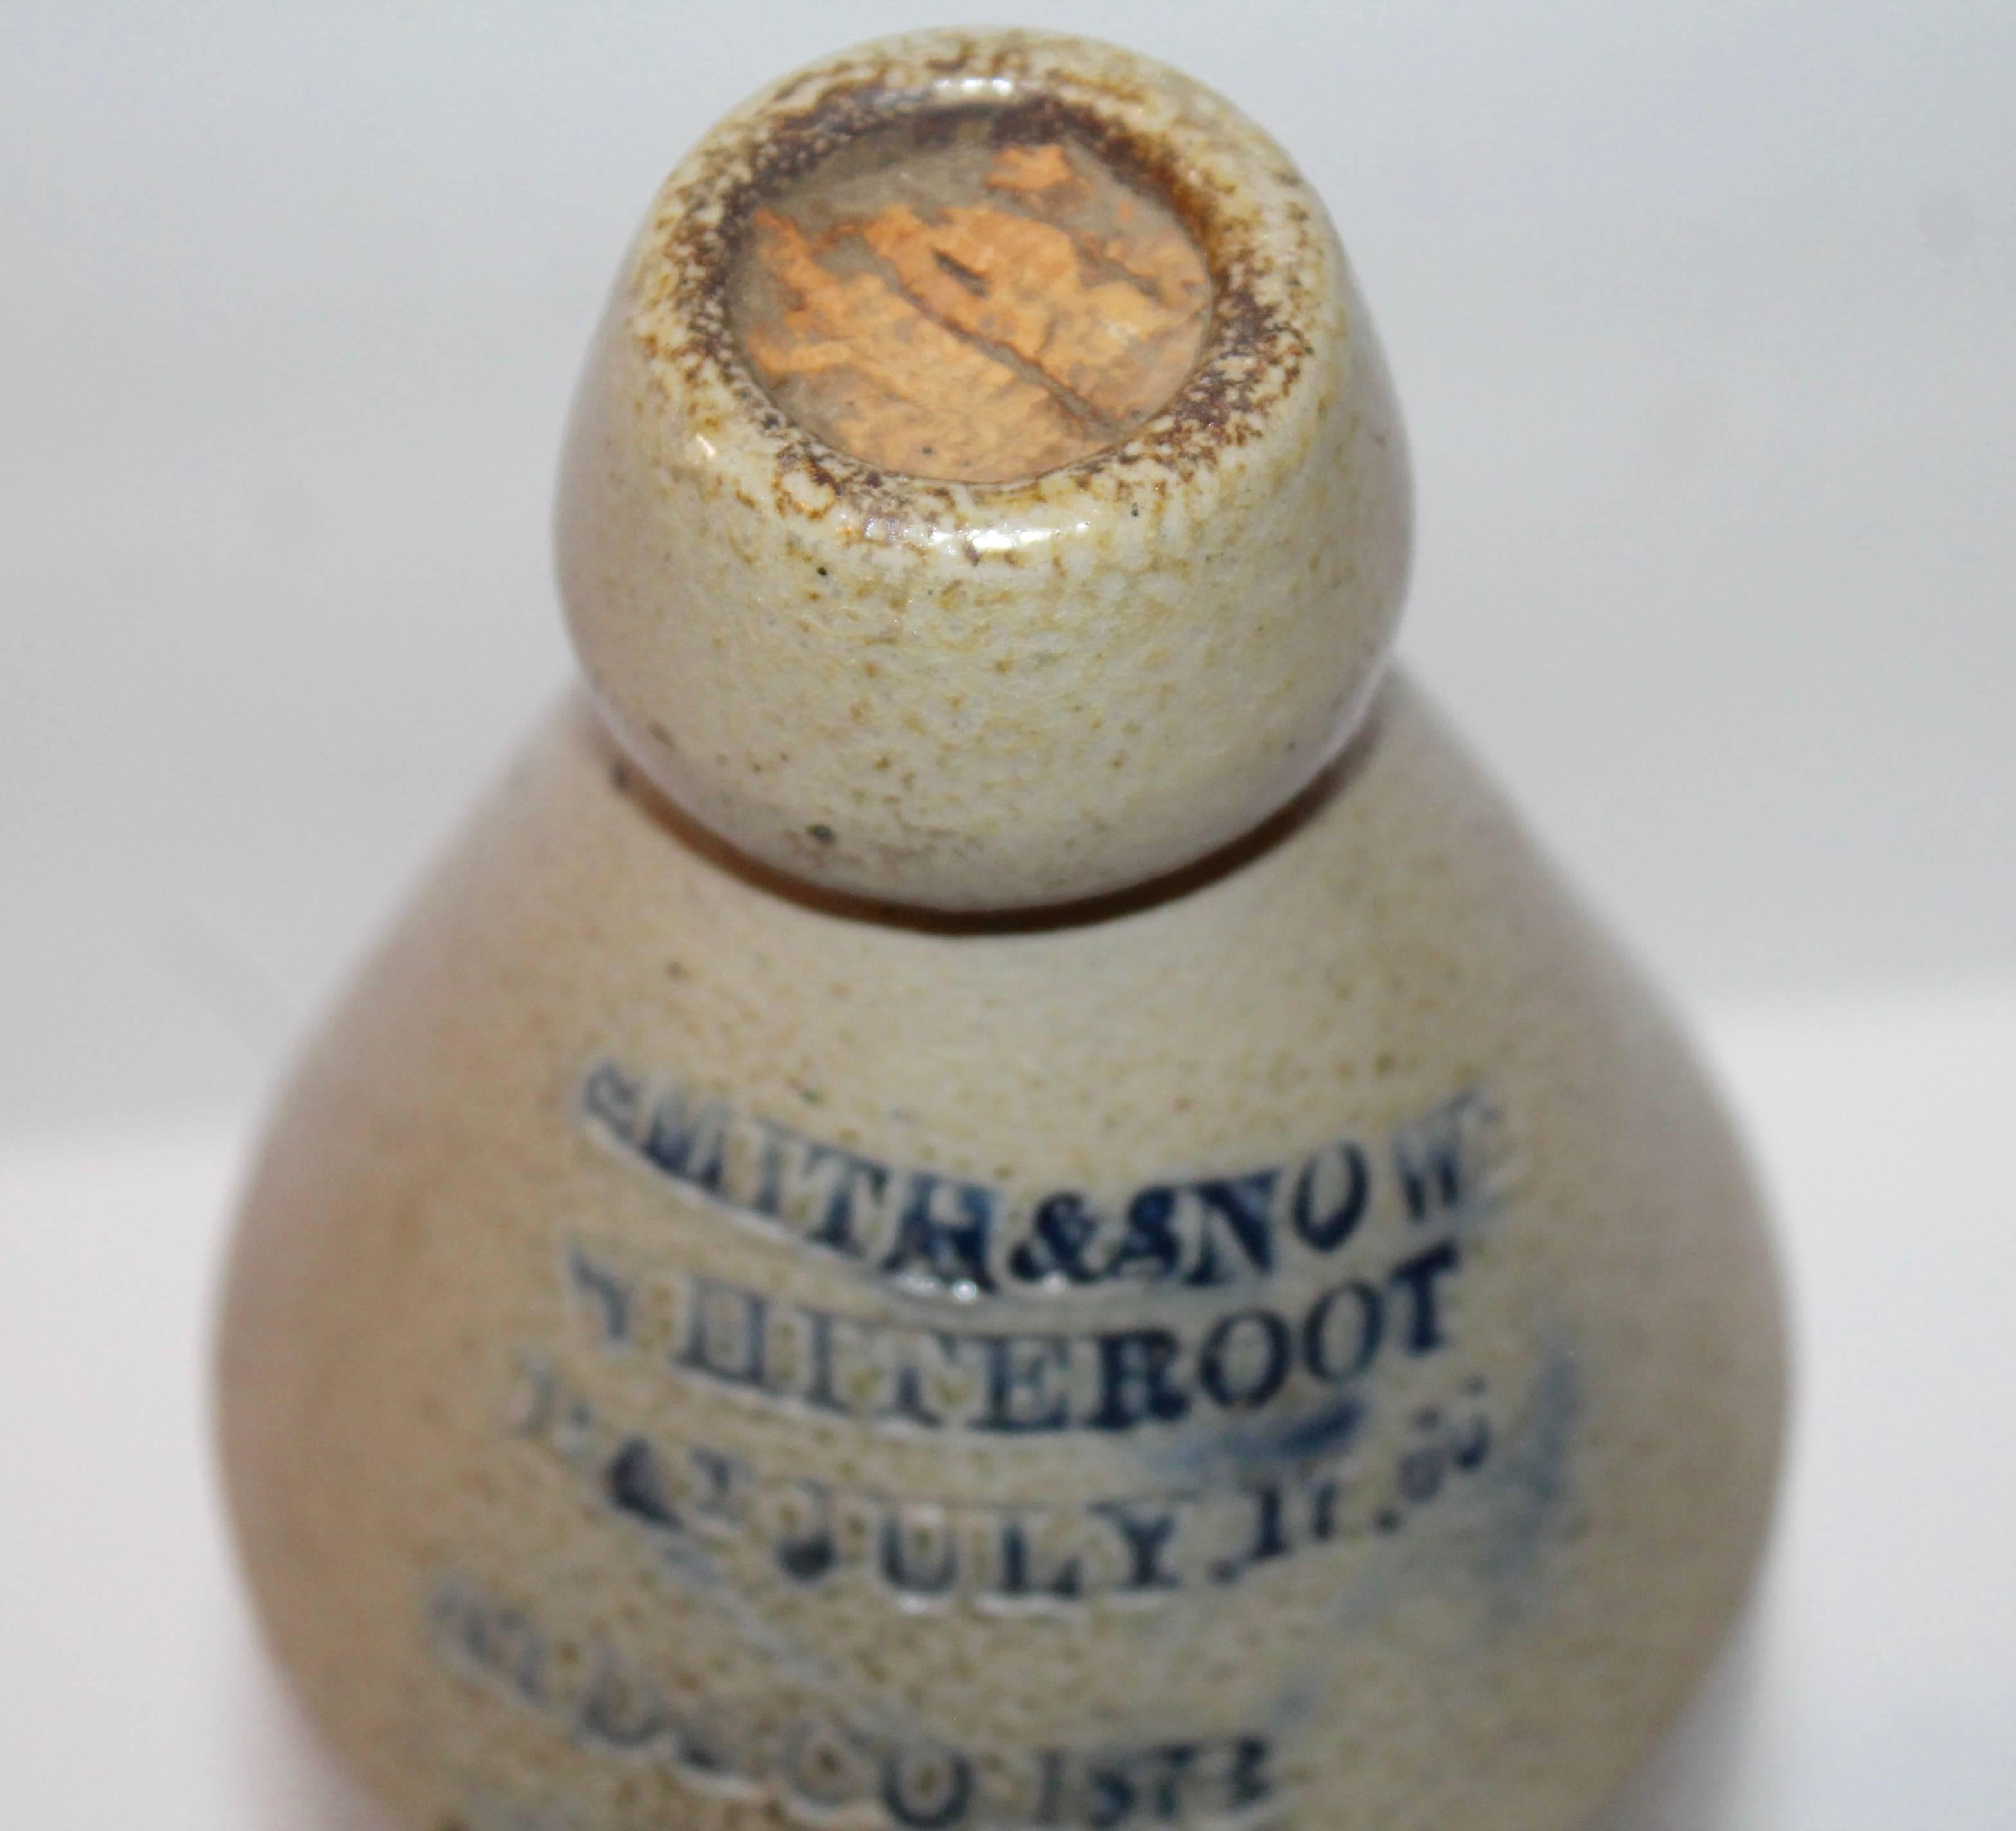 American 19th Century Smith & Snows Whiteroot Pottery Bitters Bottle, Dated 1873 For Sale